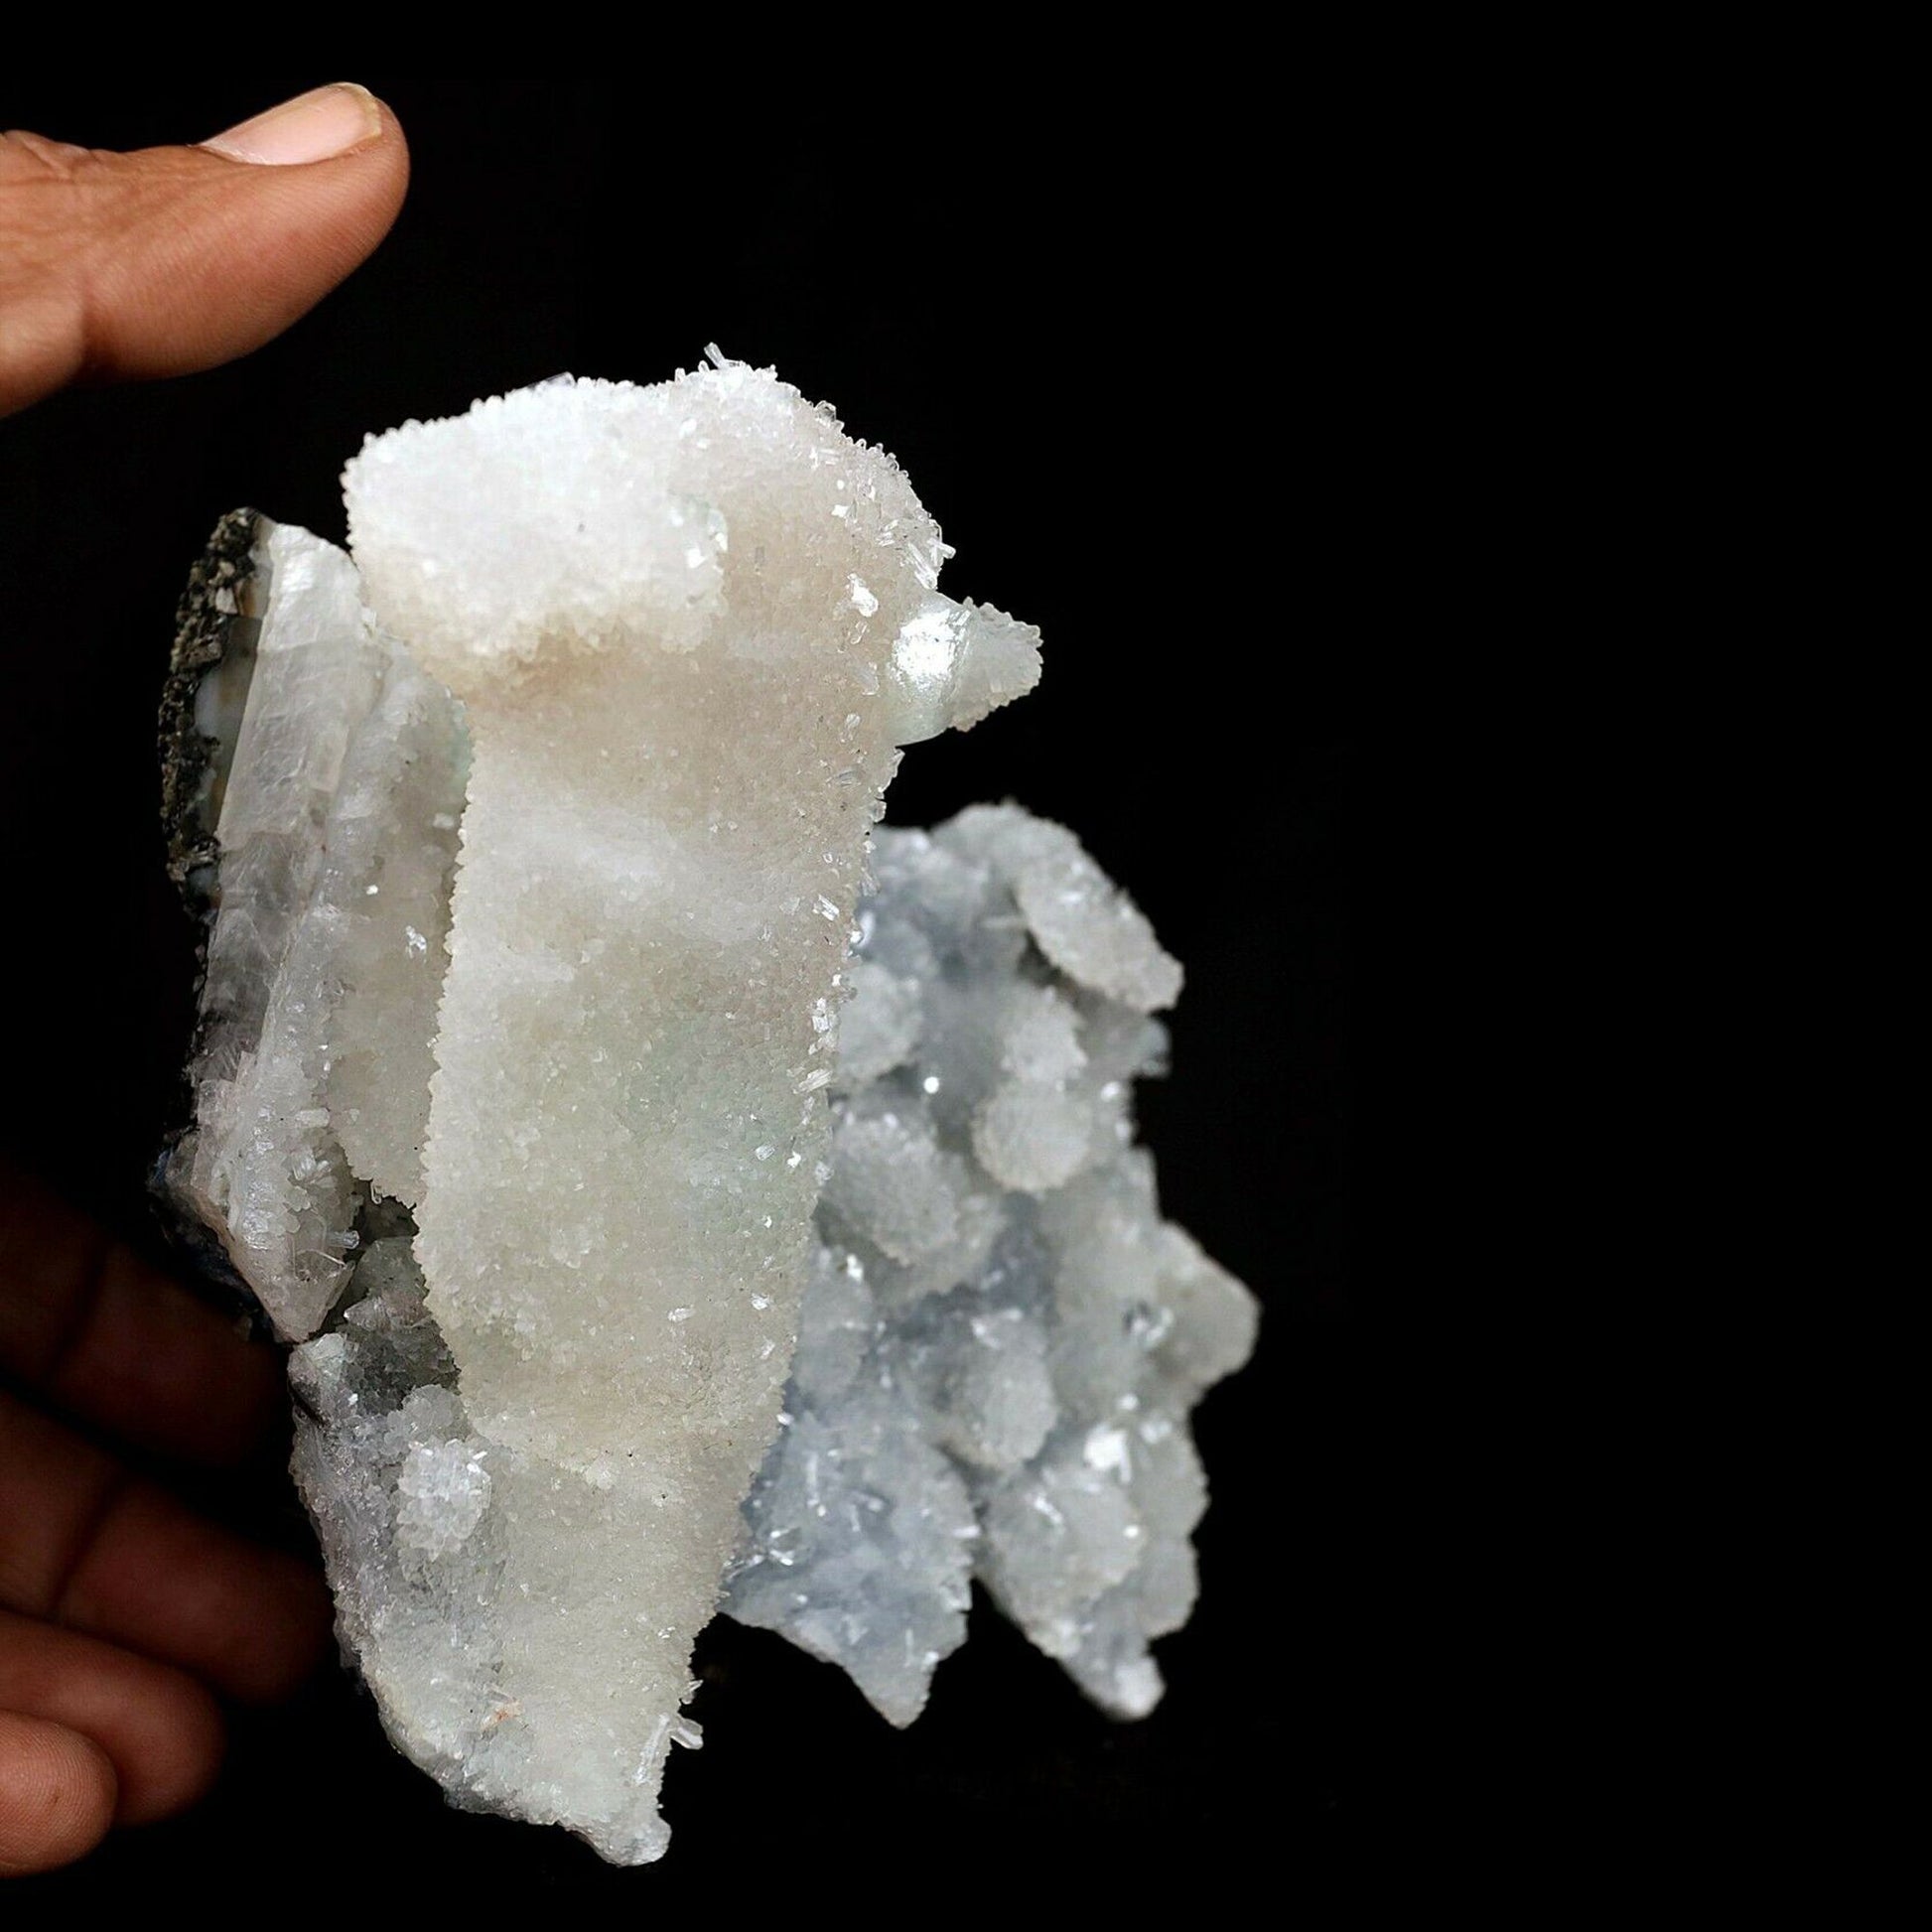 Calcite Coated Crystal on MM Quartz Natural Mineral Specimen # B 3629  https://www.superbminerals.us/products/calcite-coated-crystal-on-mm-quartz-natural-mineral-specimen-b-3629  Features:A bright white, microcrystalline Quartz stalactite naturally sculpture formation coated withcalcite crystals The combination and contrast along with the luster, color, and crystal formation are outstanding. A striking and aesthetic piece in excellent condition. Primary Mineral(s): Calcite